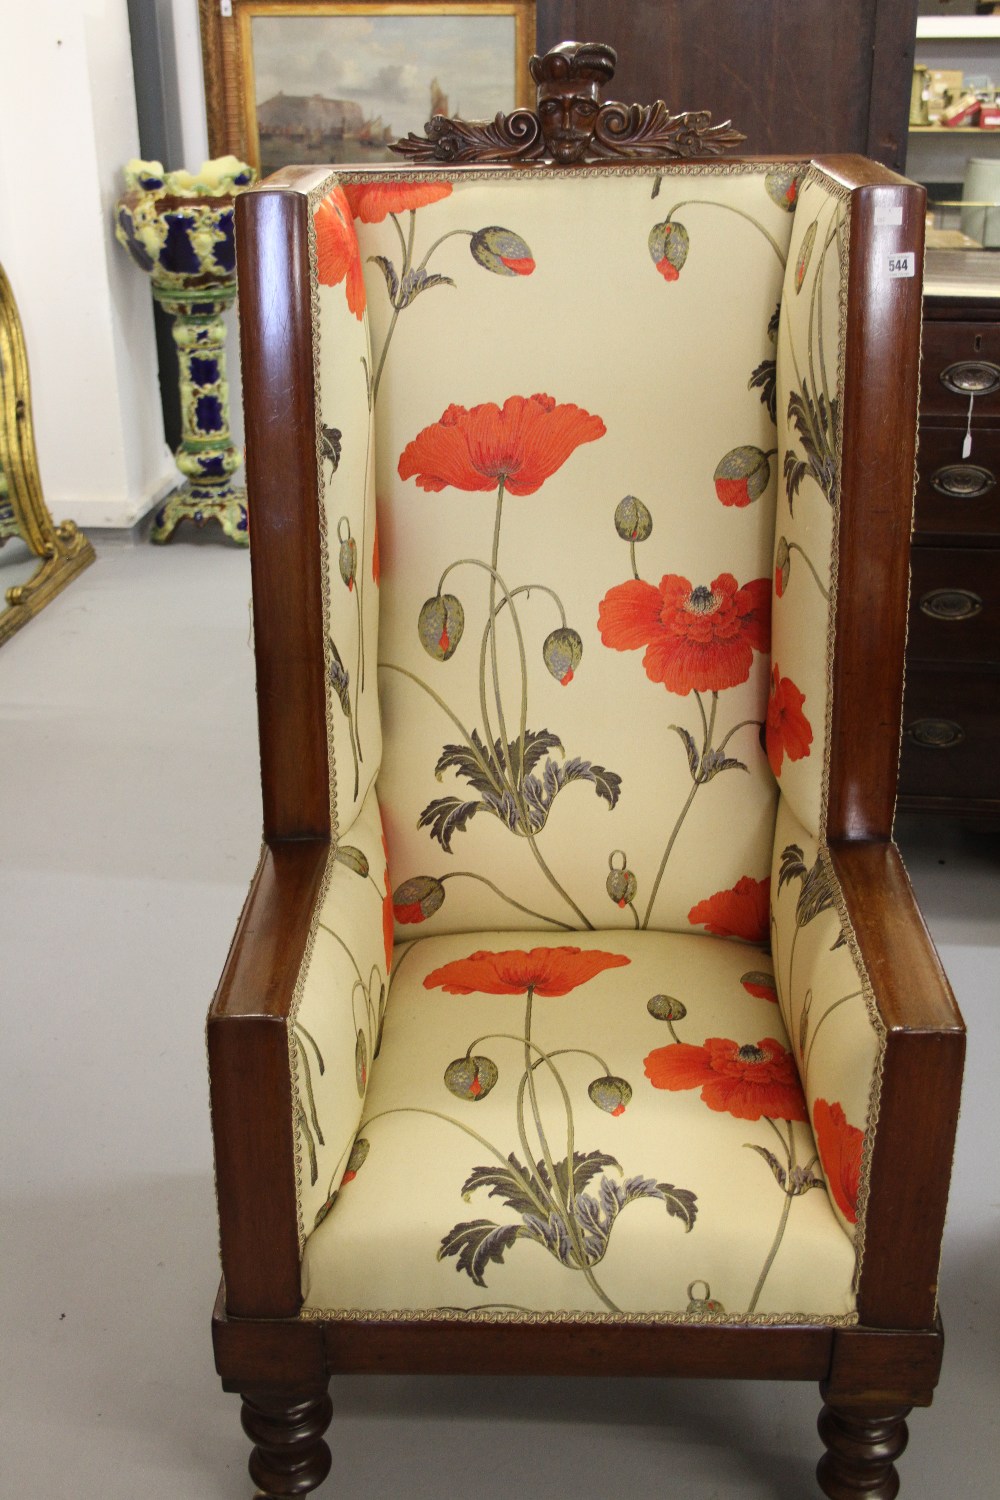 19th cent. Mahogany wing back chair, upholstered in a contemporary style. The chair has a later